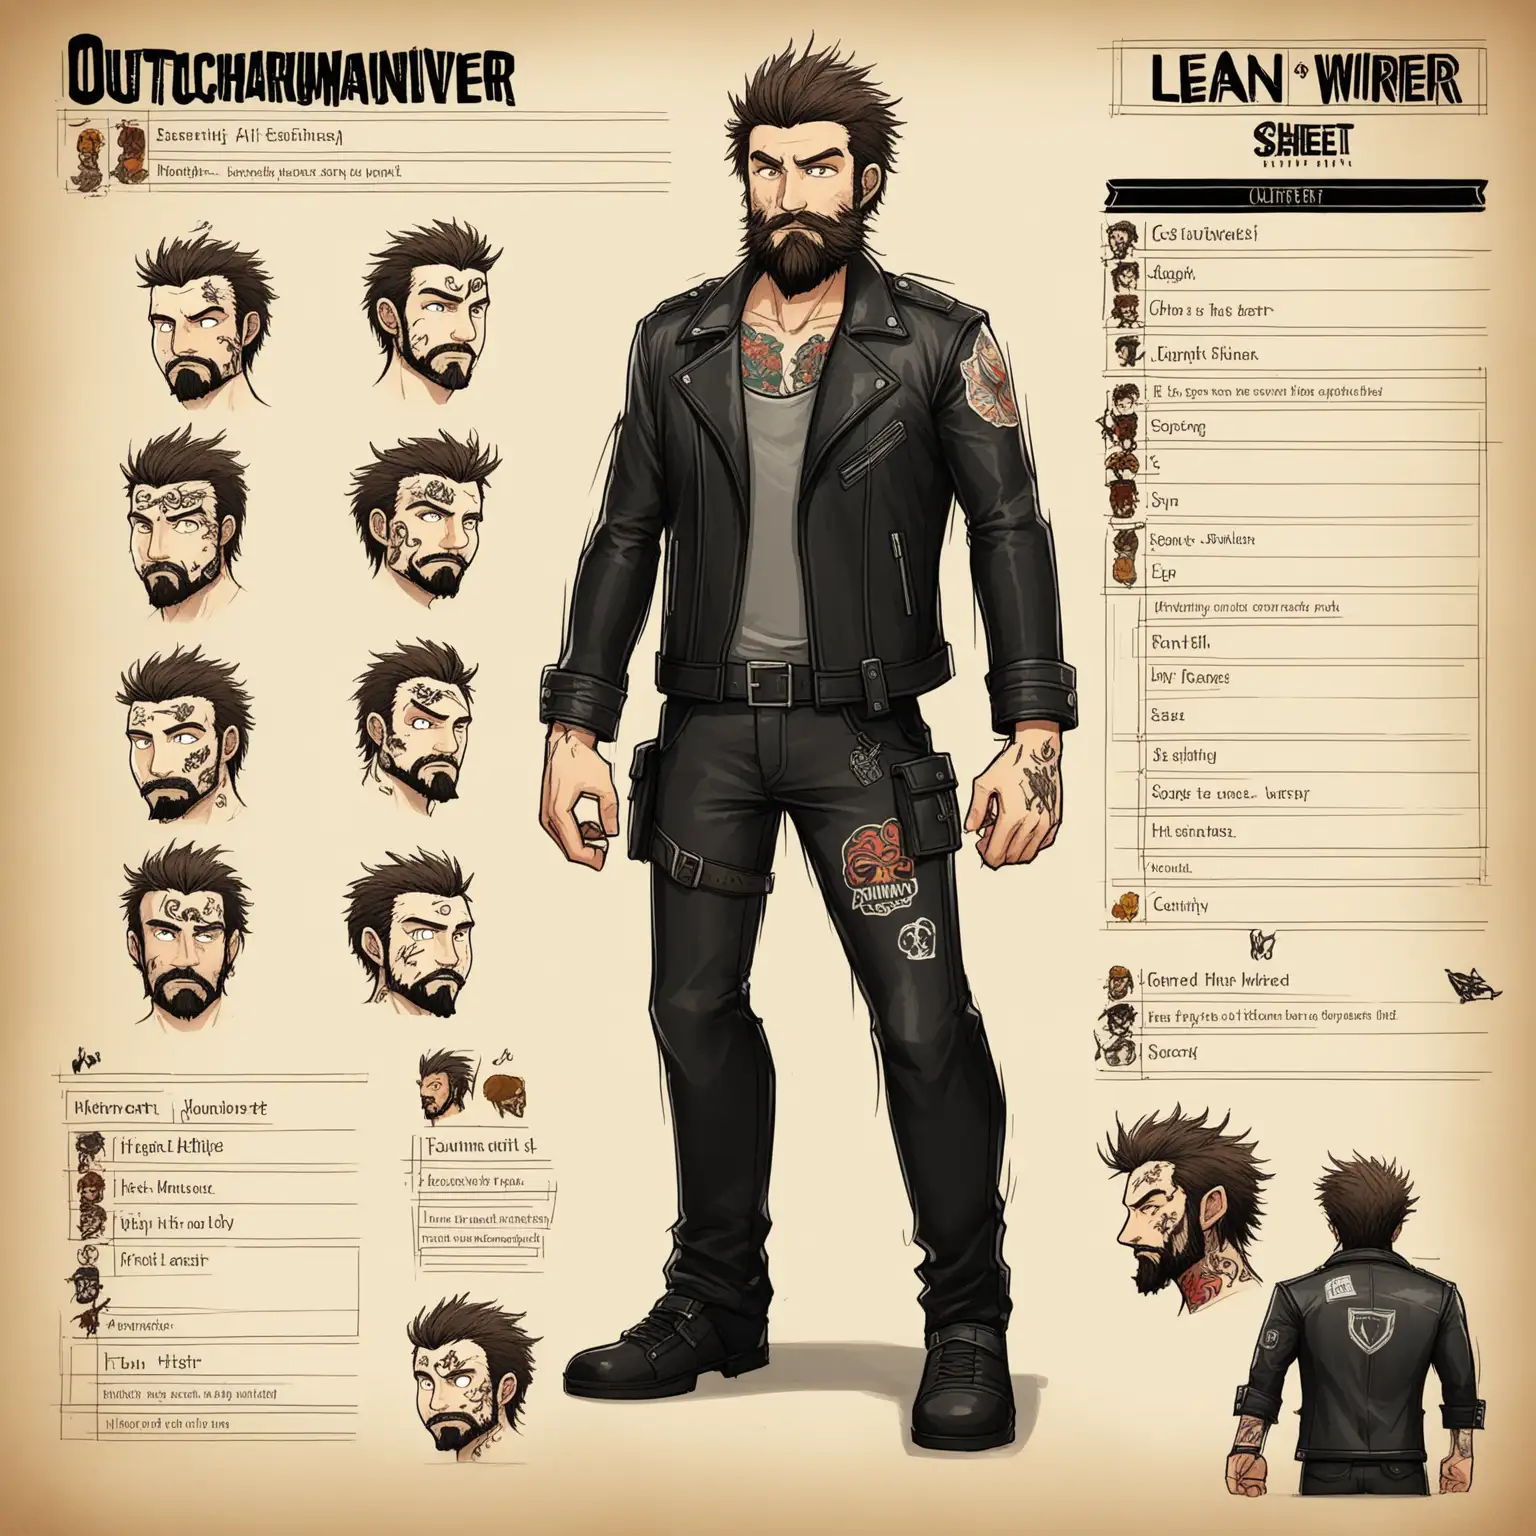 Character Sheet, lean and wiry, with a cunning glint in his eyes. He sports a short, scruffy beard and a scar running across his cheek, hinting at a rough past. His attire is minimalistic, consisting of a black leather jacket adorned with various tattoos and patches. He exudes an air of confidence and agility, ready to outmaneuver his opponents at every turn.